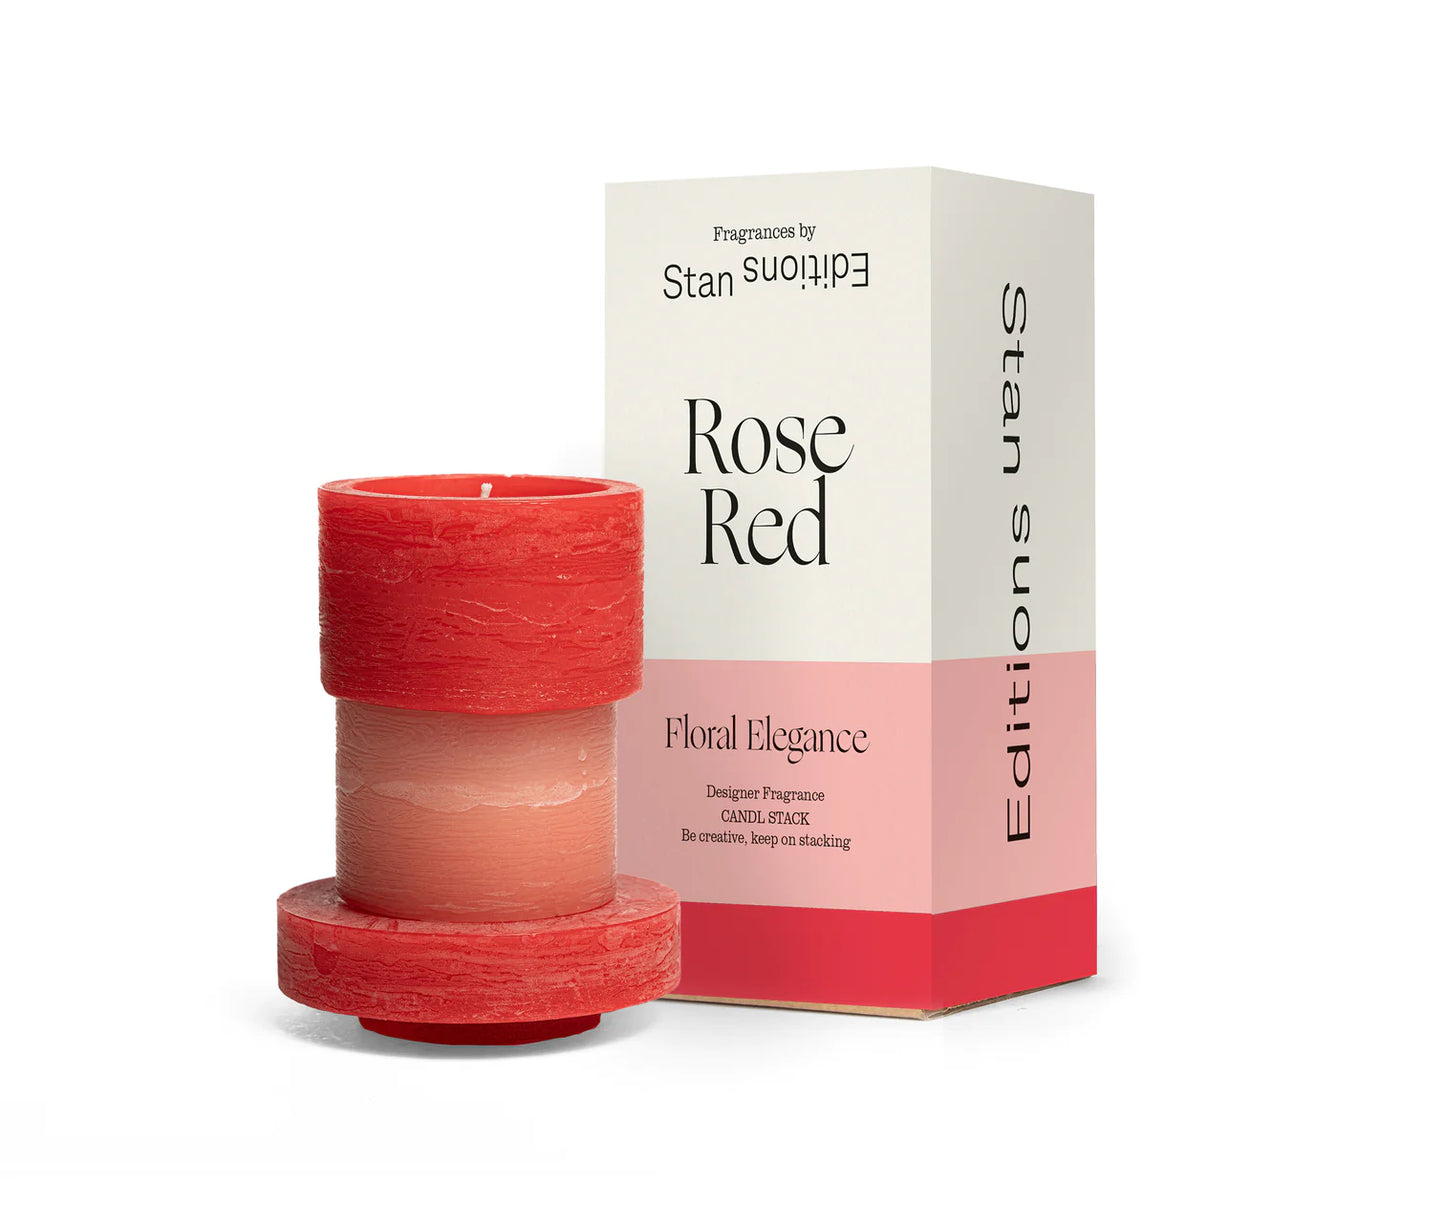 A red and pink 3-layered stacked candle next to box packaging.